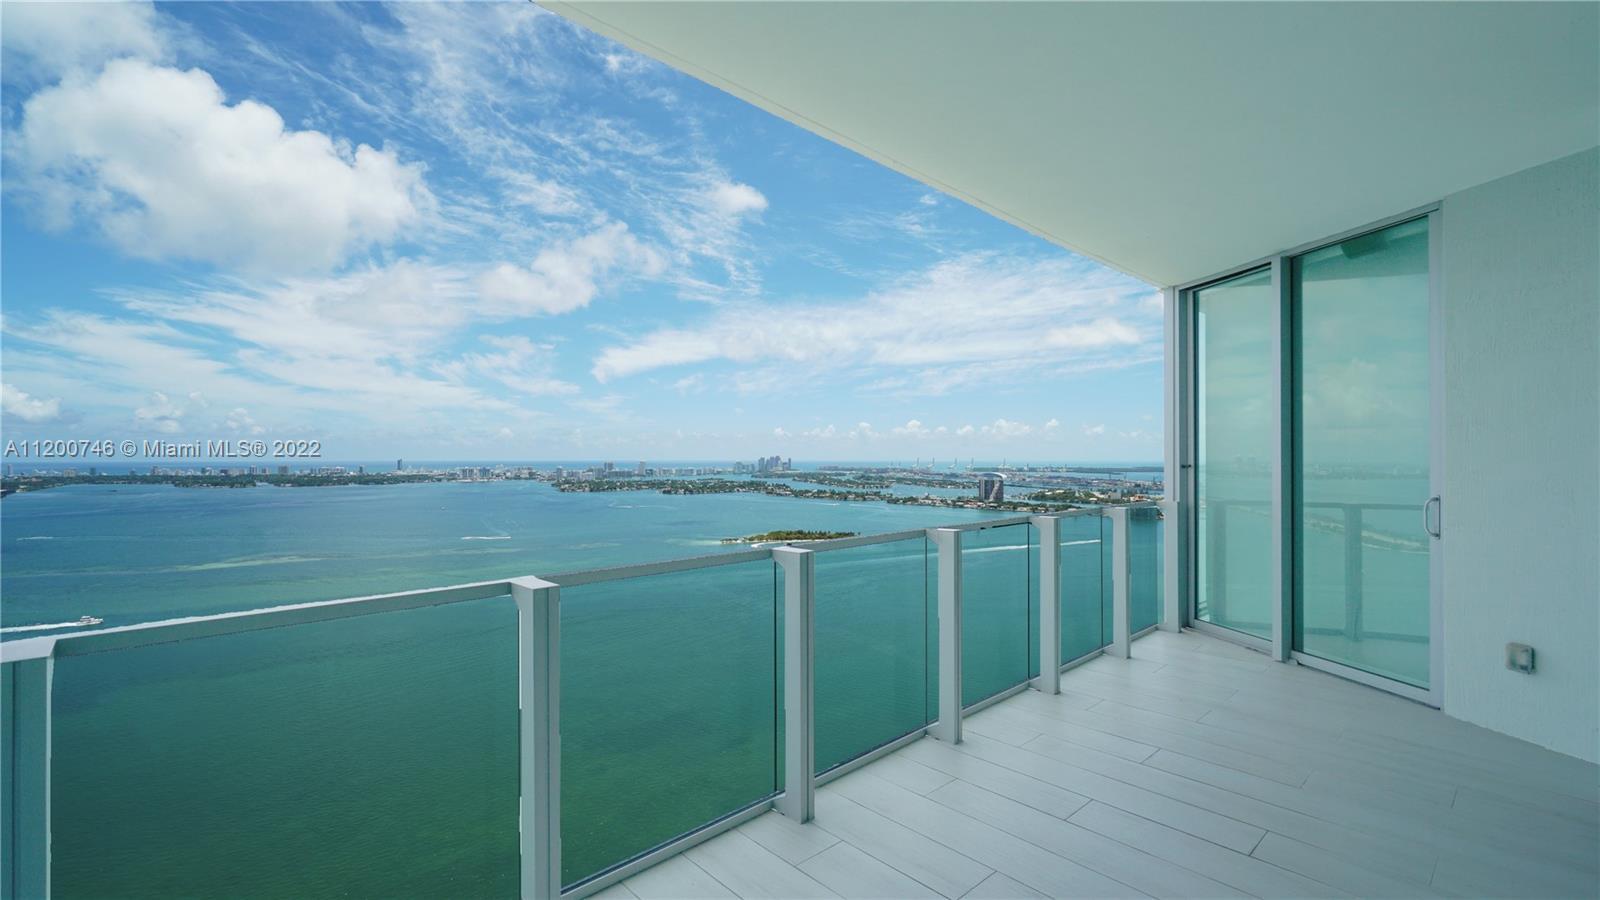 Amazing Biscayne Beach Condo,  2 Bedroom 2 Bath Condo residence on the 44th floor with crazy water v